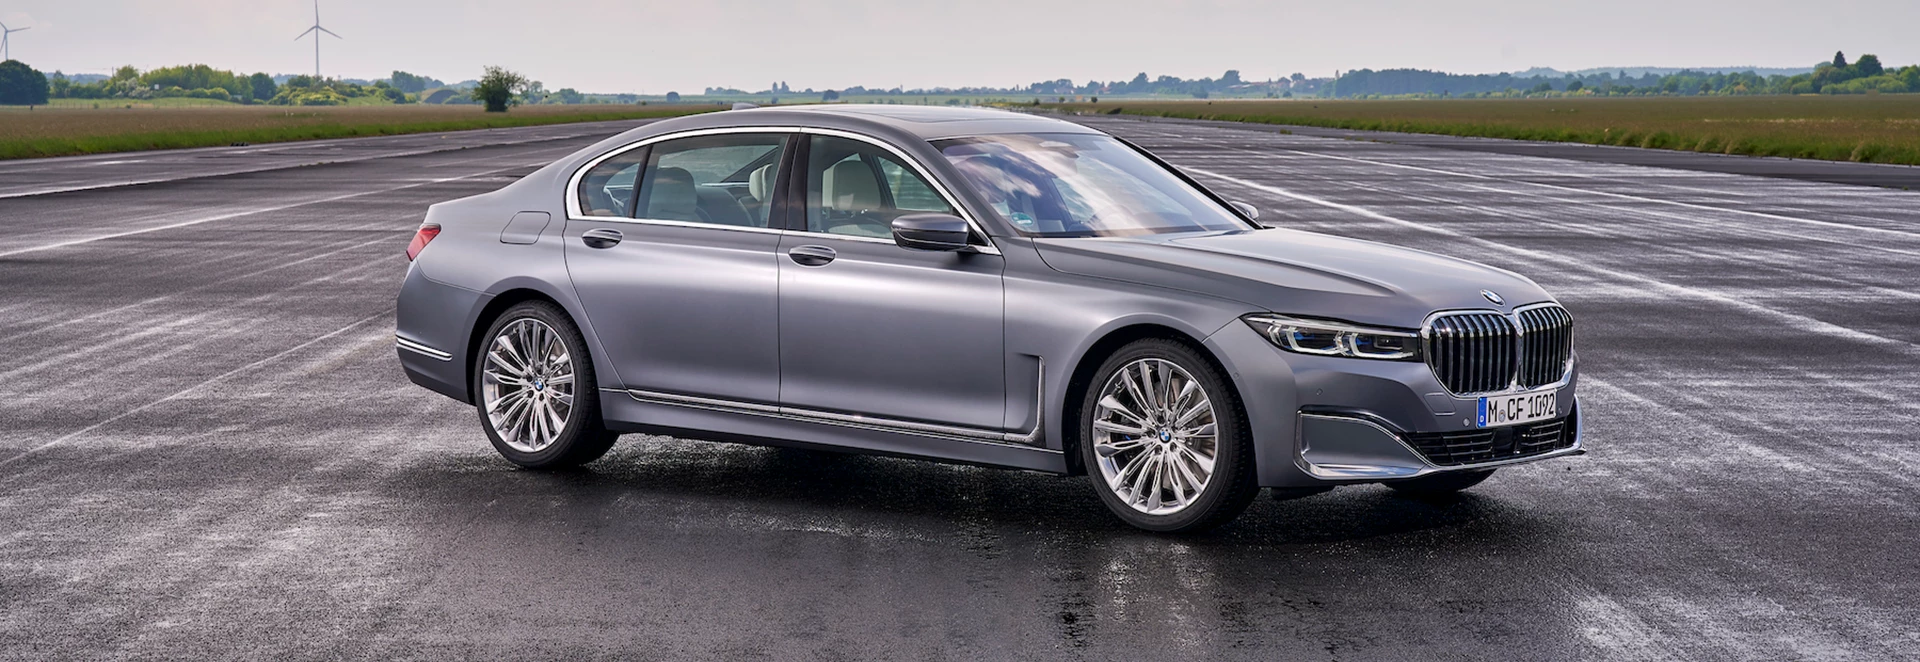 Buyer’s guide to the BMW 7 Series 